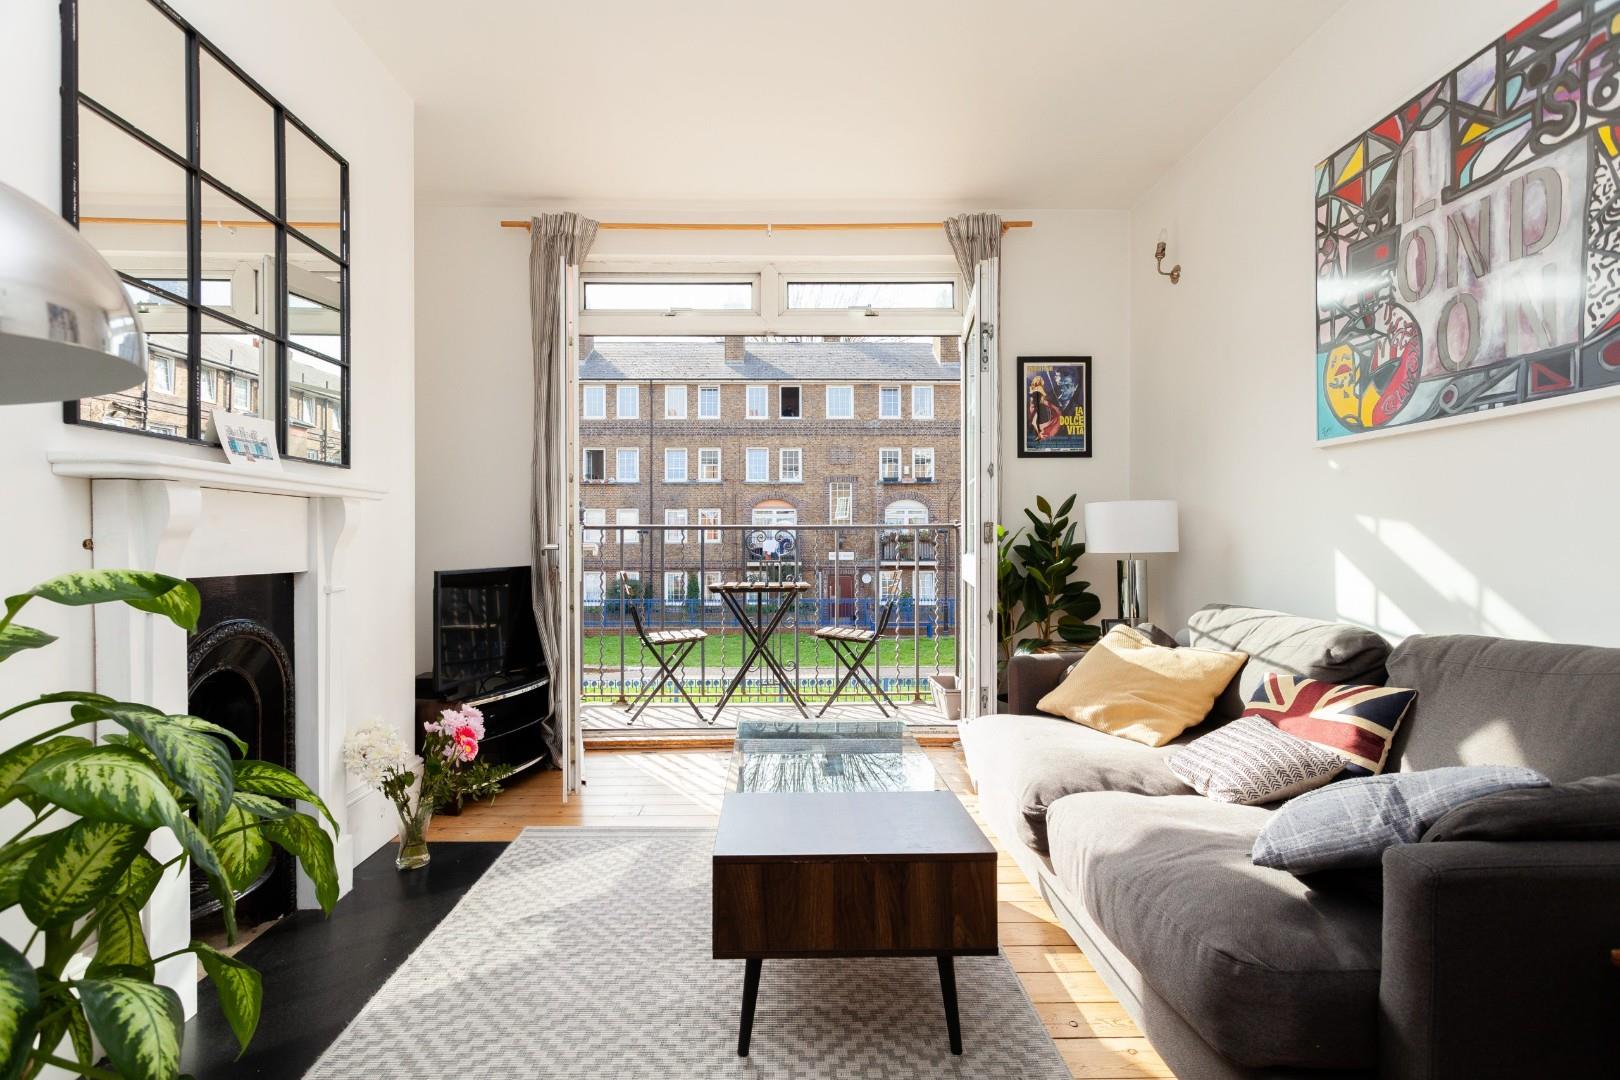 Similar Property: Flat - First Floor in Bethnal Green